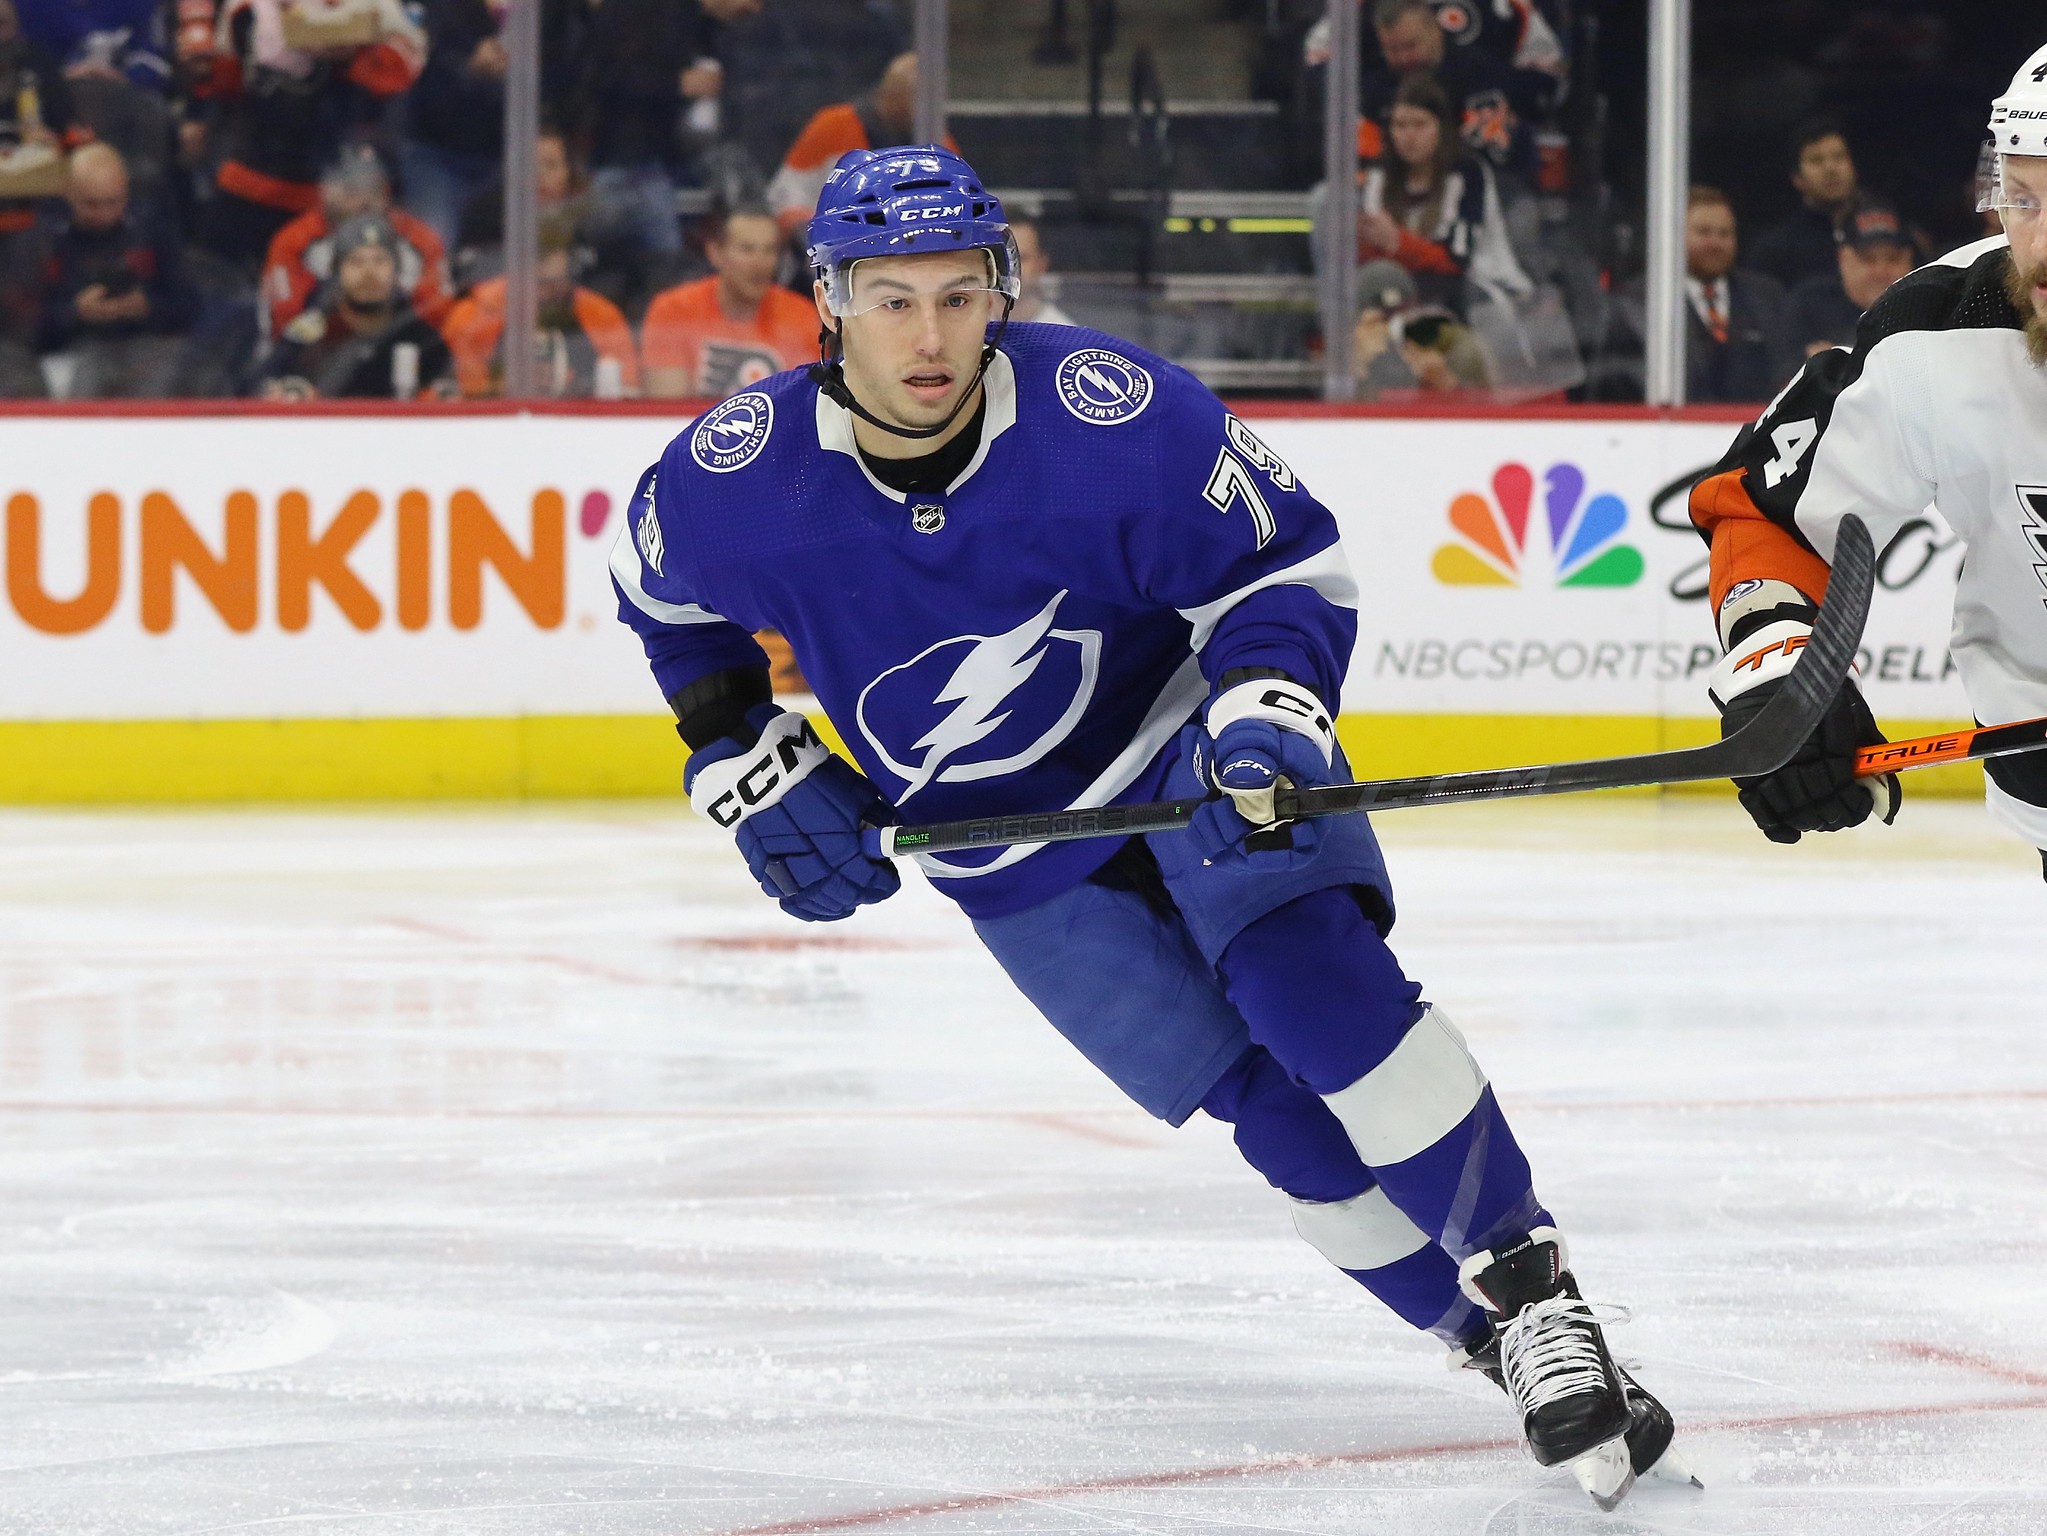 LA Kings: Three players to target after Lightning re-signed Sergachev